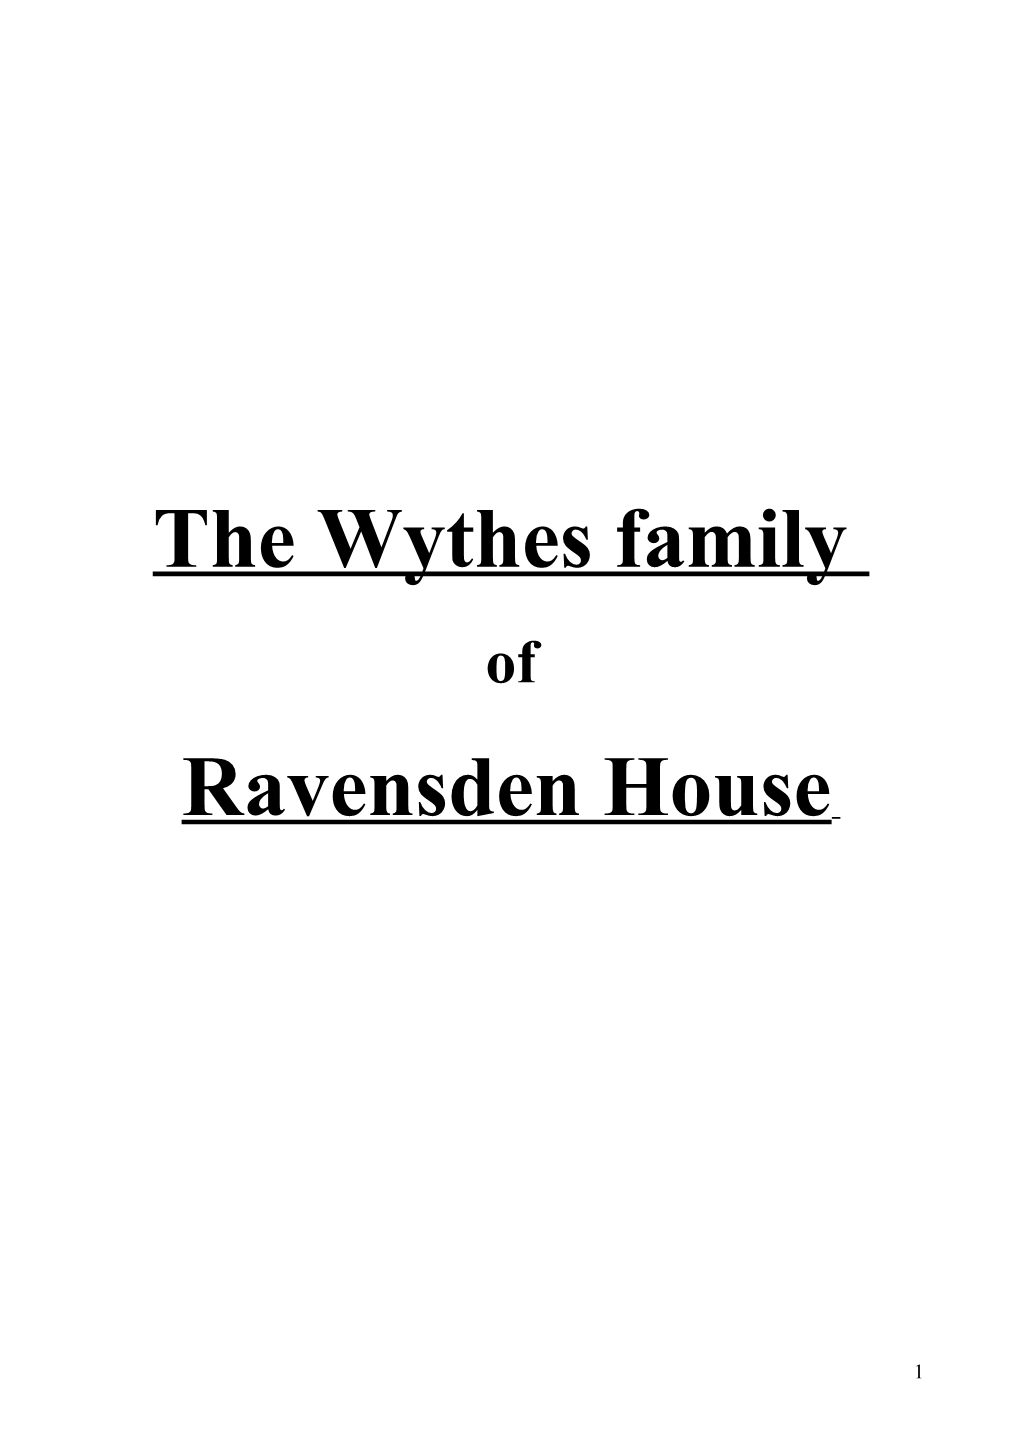 Who Were the Wythes and Where Had They Come from ?